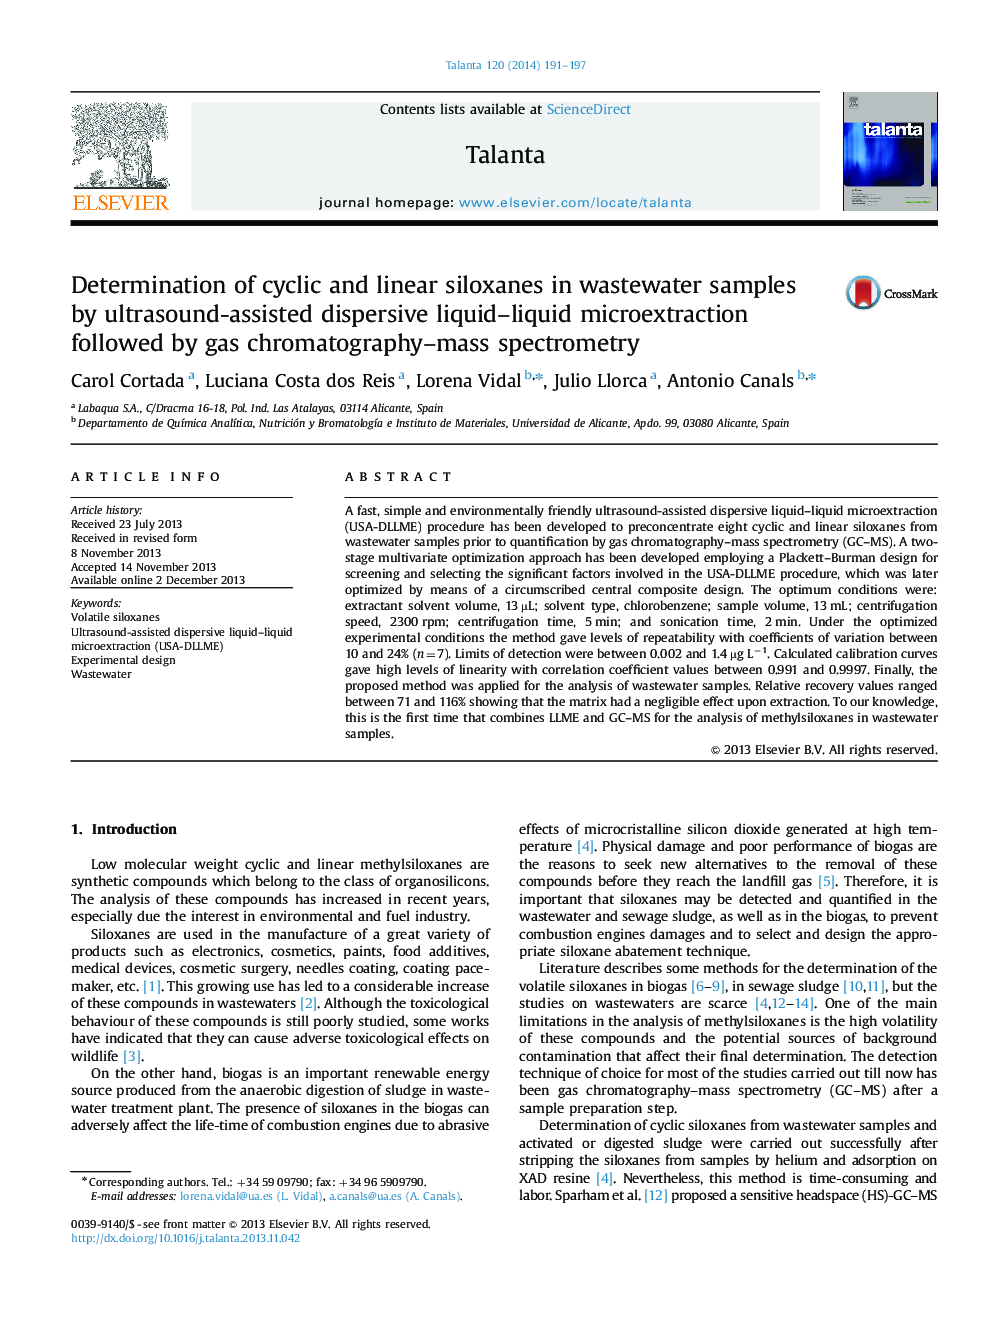 Determination of cyclic and linear siloxanes in wastewater samples by ultrasound-assisted dispersive liquid-liquid microextraction followed by gas chromatography-mass spectrometry